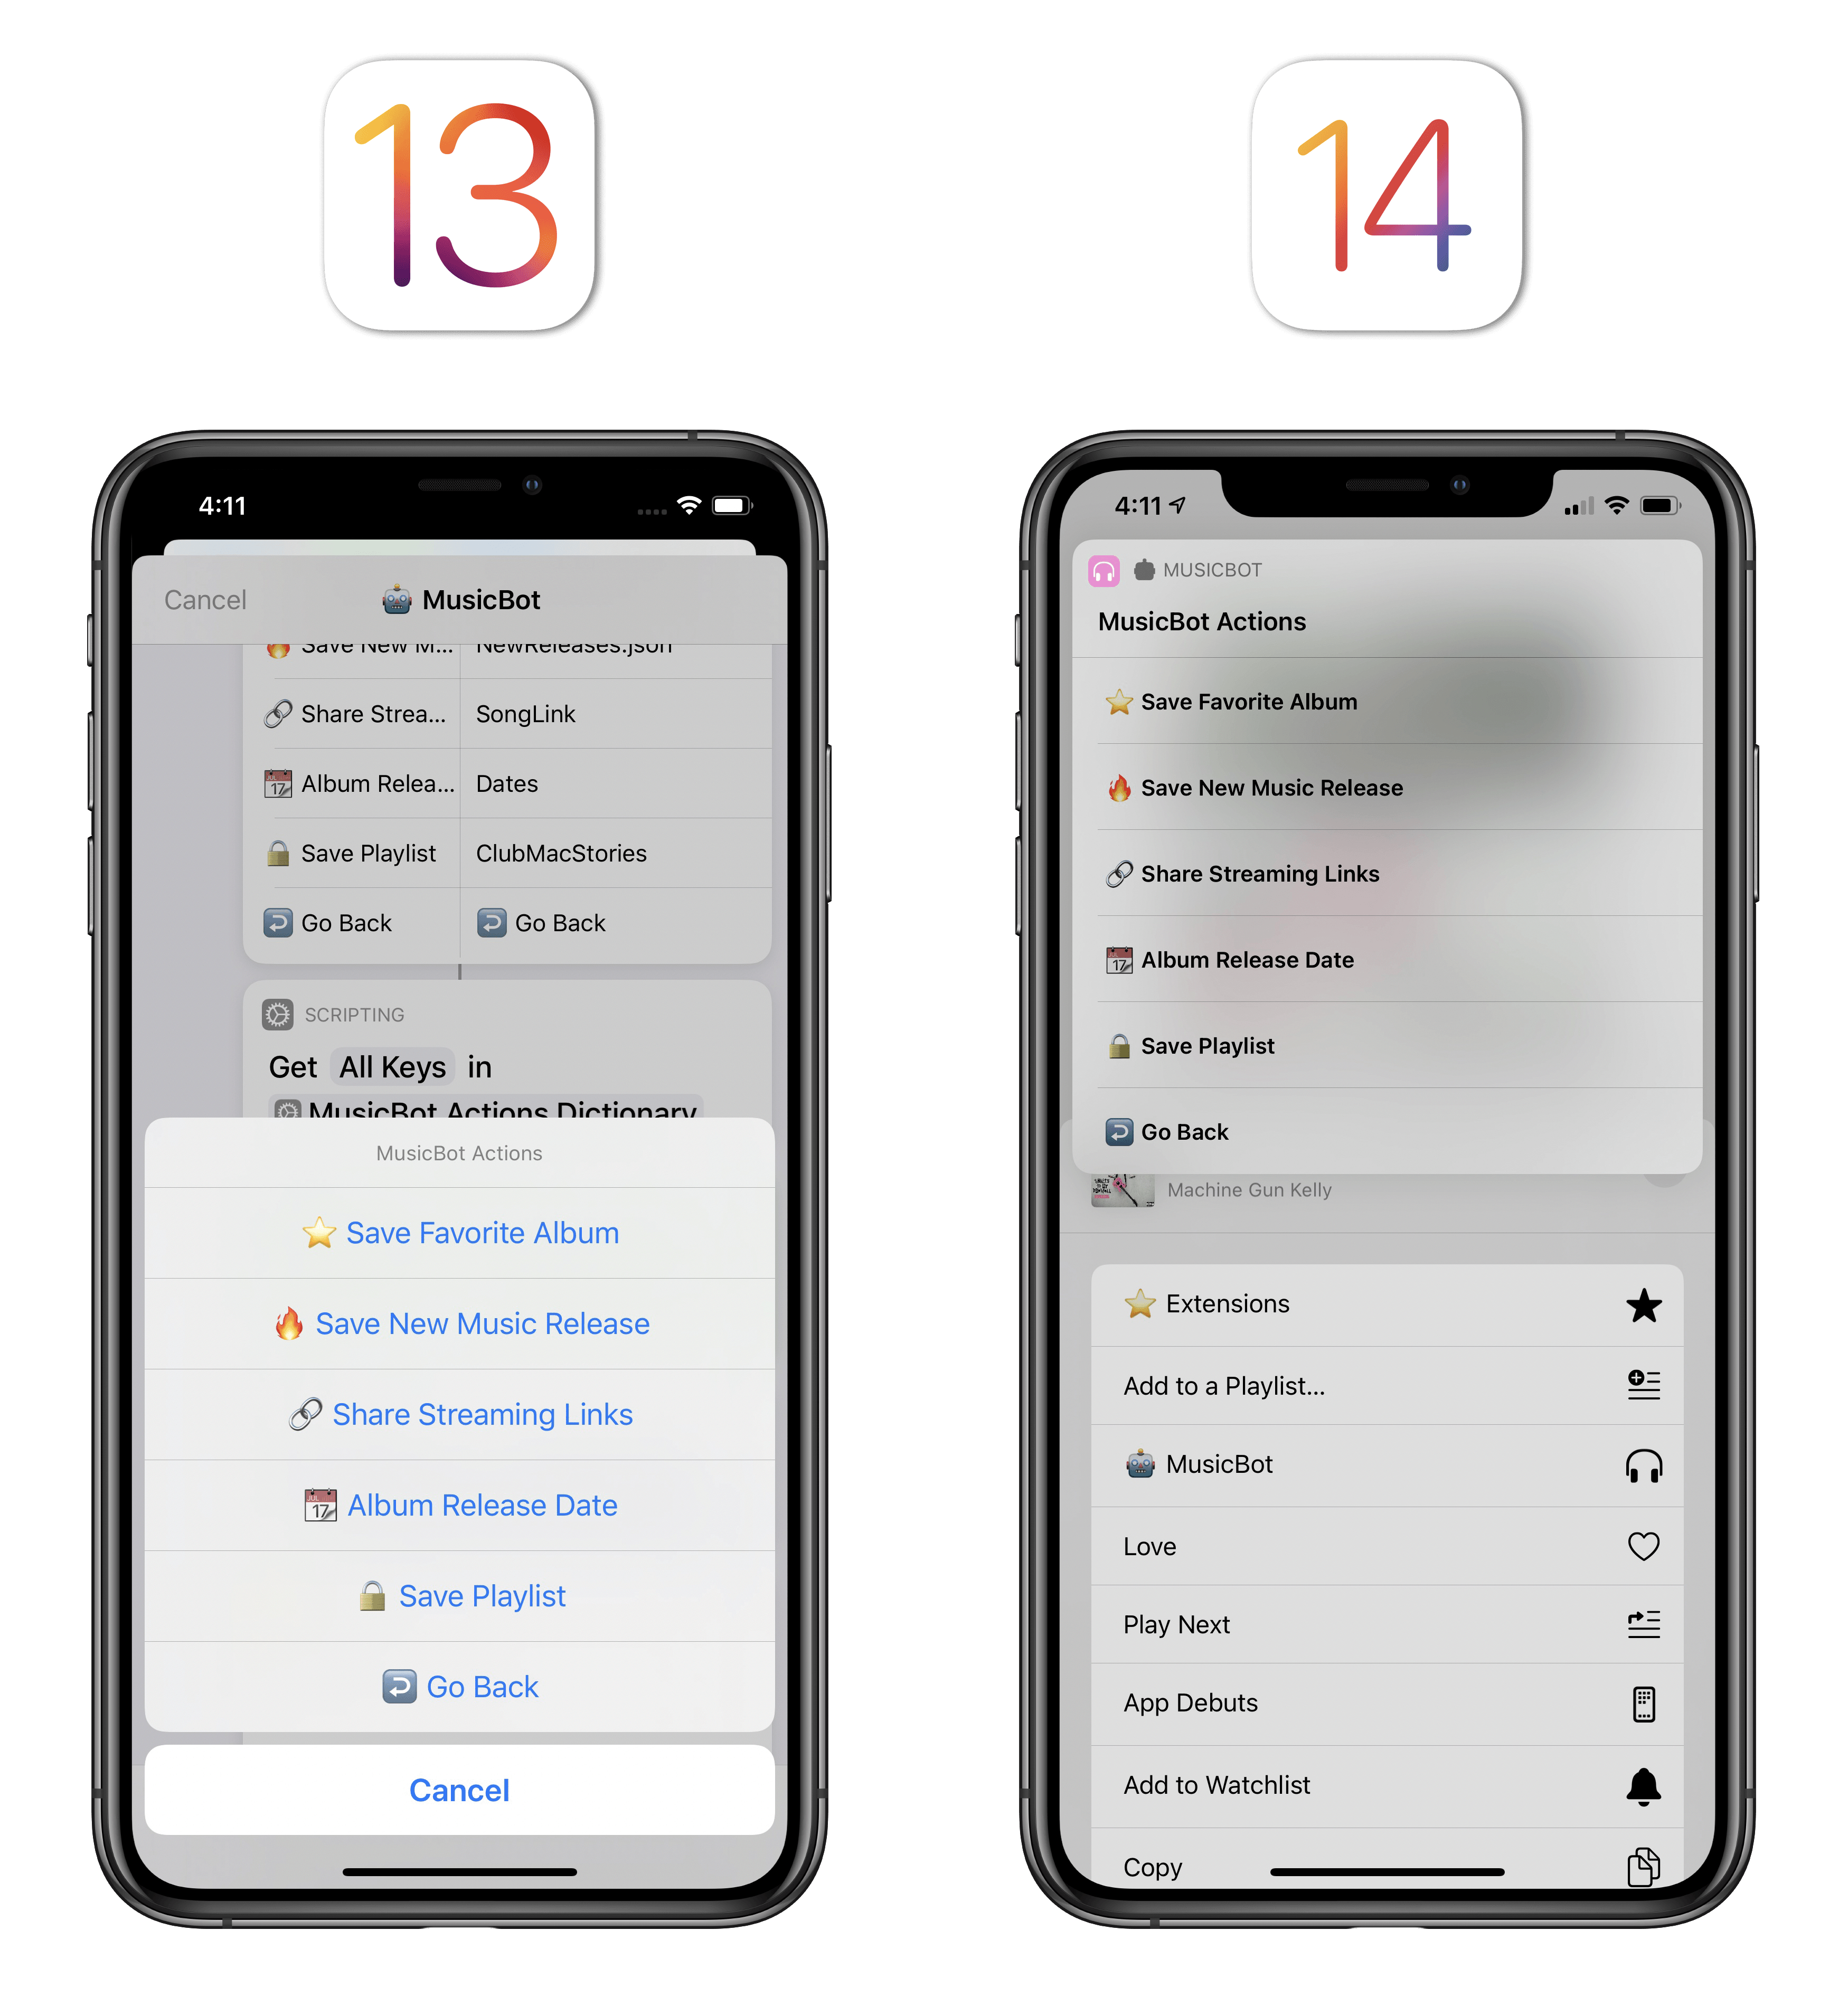 Actions that require interactions are presented with compact UI in iOS 14.